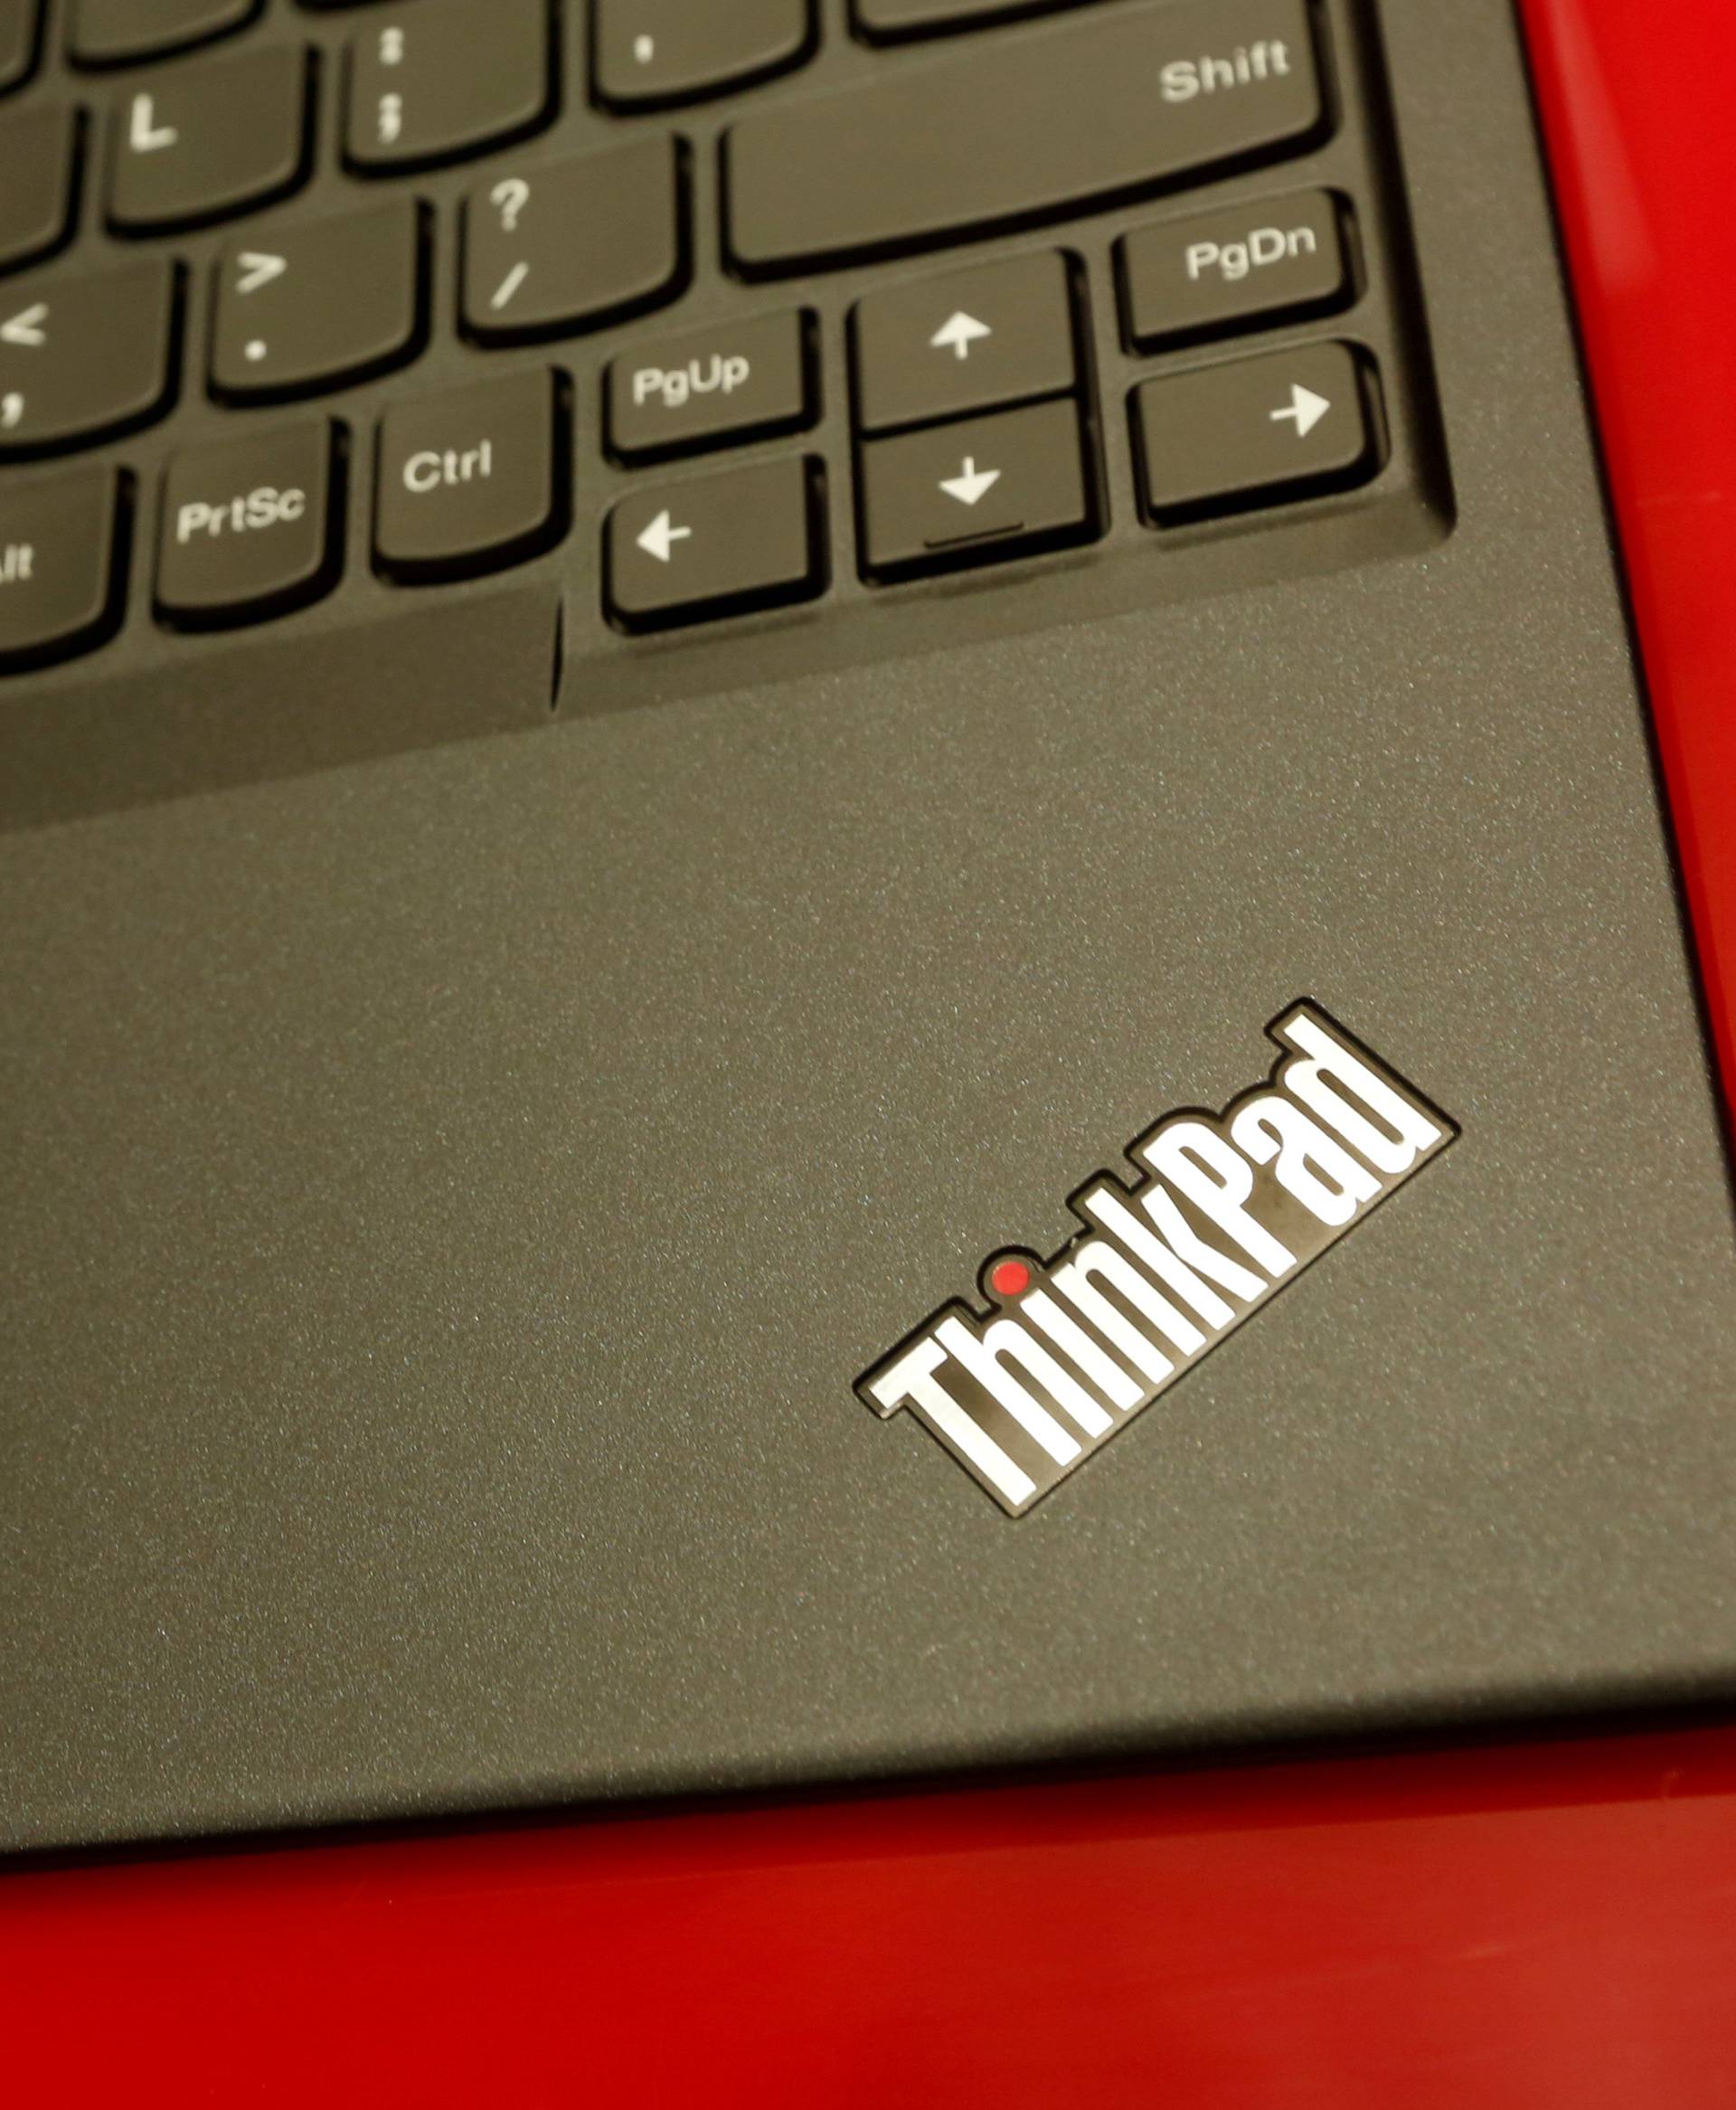 A product of Lenovo is displayed during a news conference on the company's annual results in Hong Kong